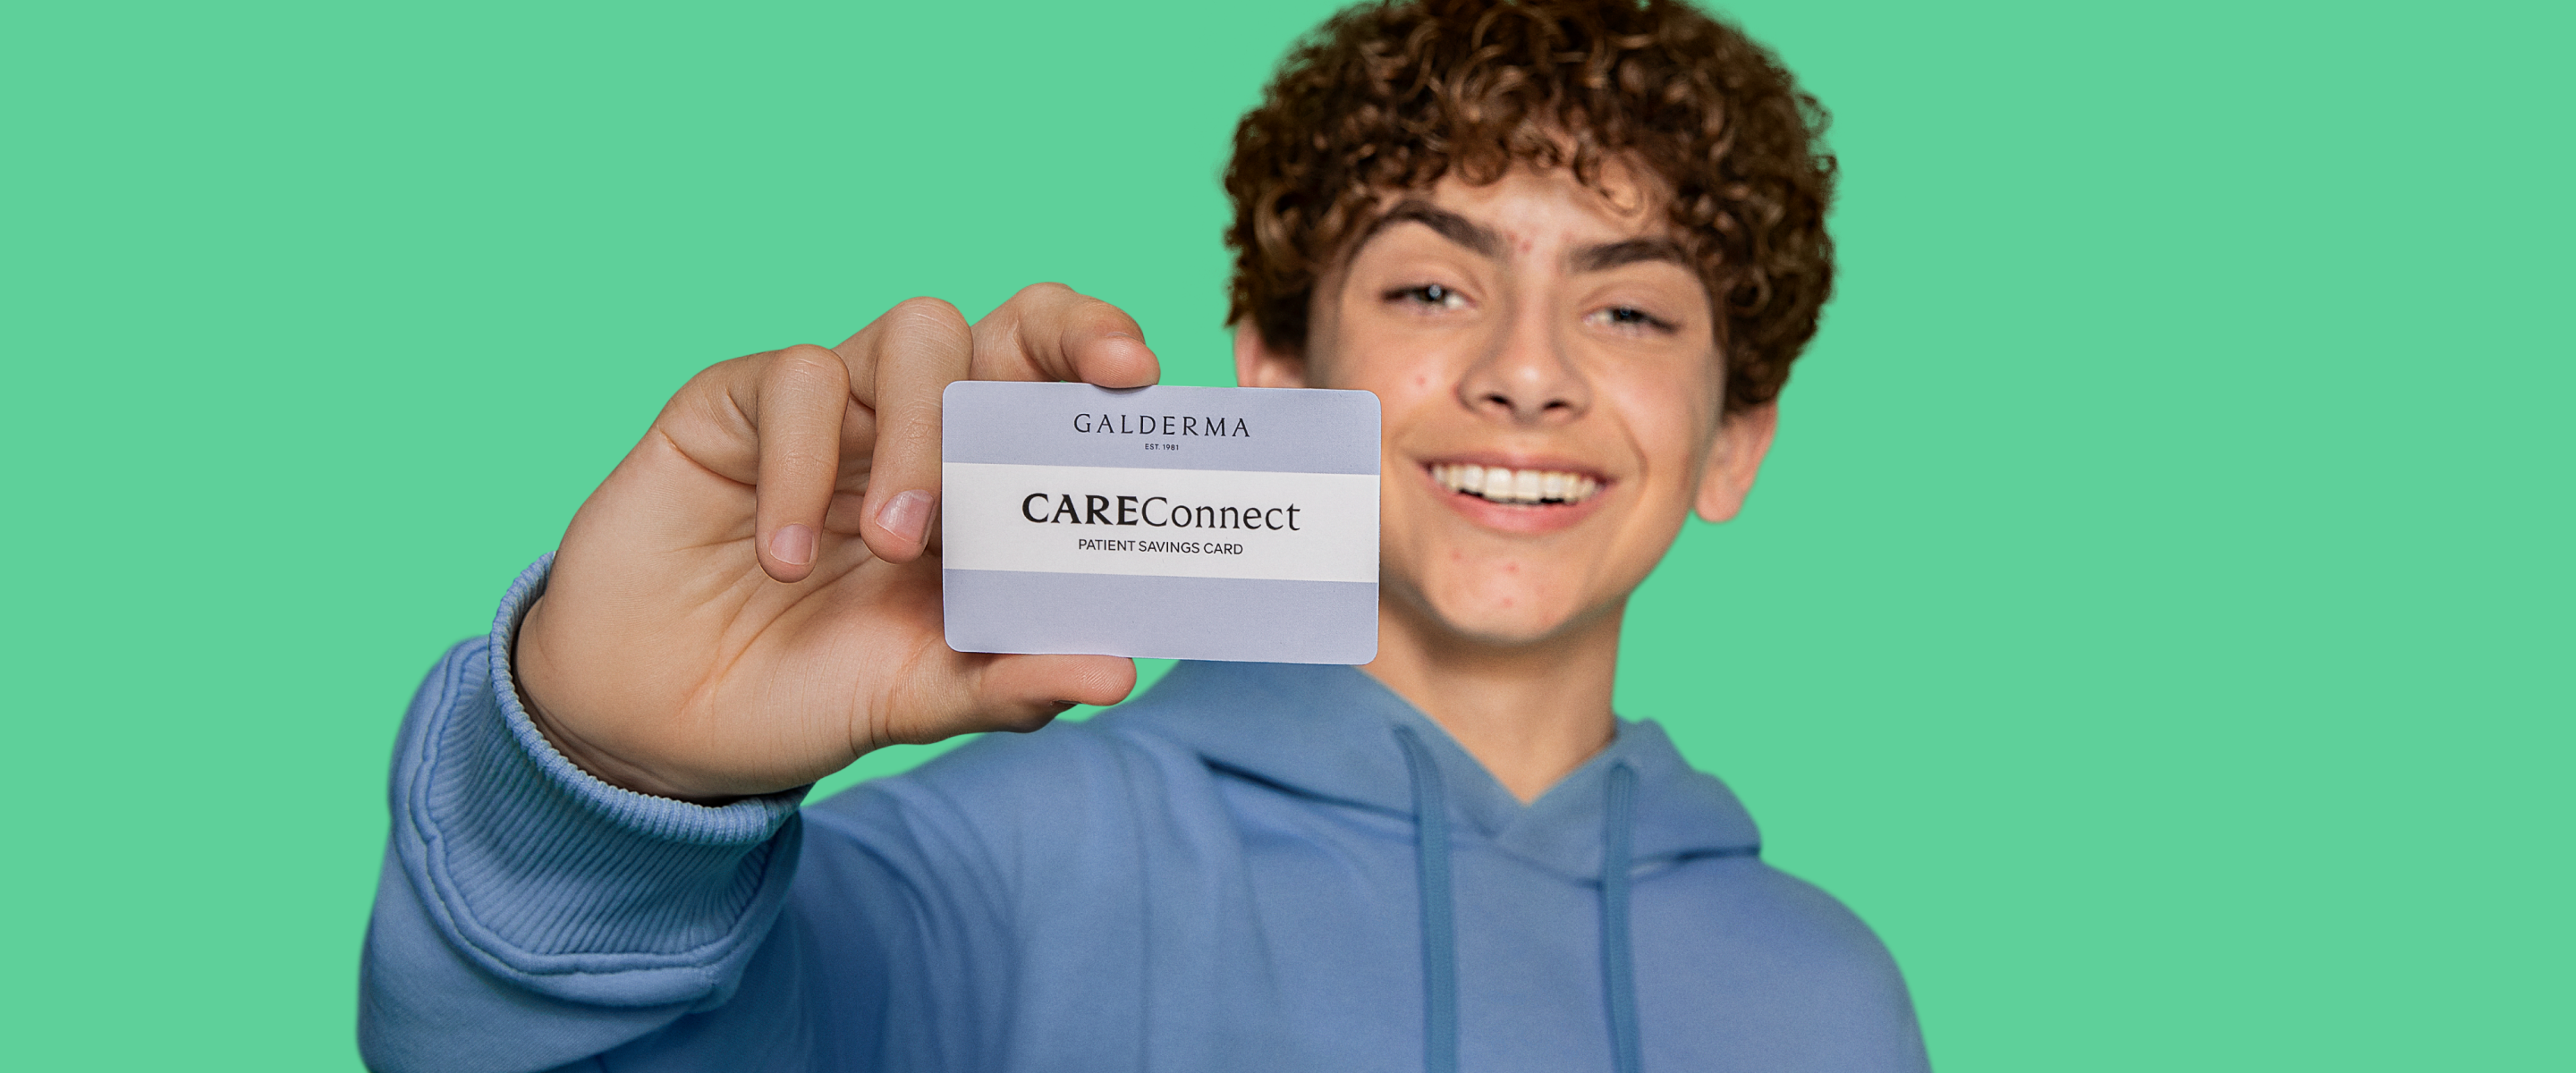 oung male teen holding the Galderma CareConnect card up in front of his face toward the camera.